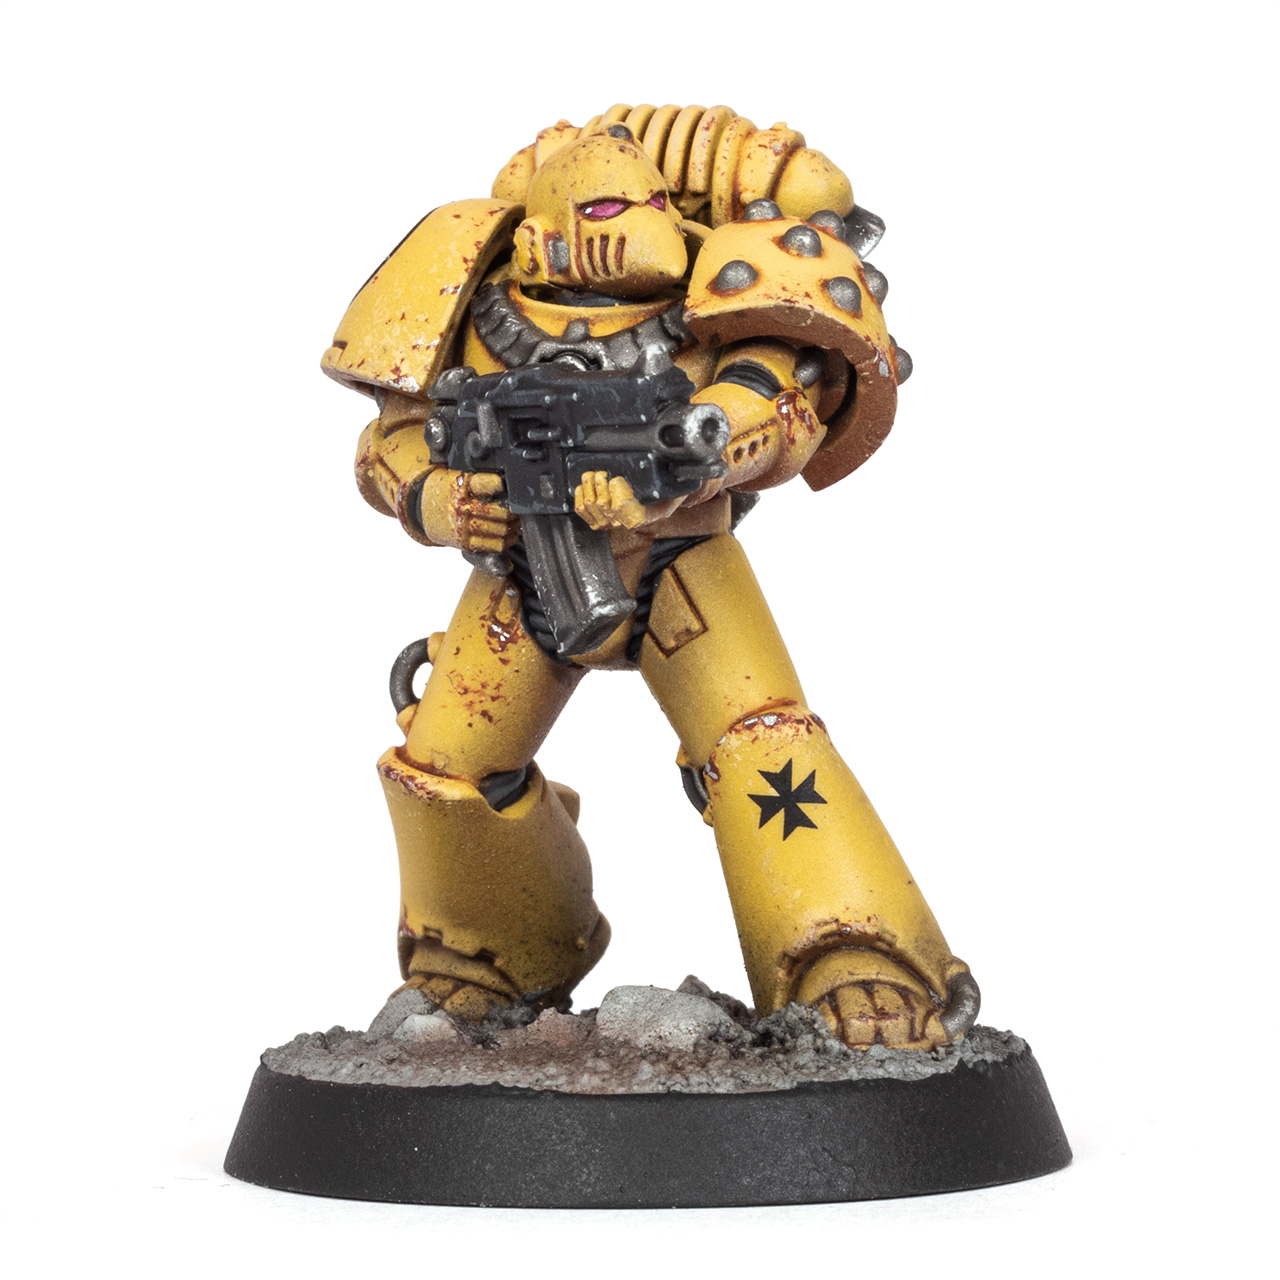 Horus Heresy era Imperial Fist in MkVI Corvus armour front, painted by Stahly